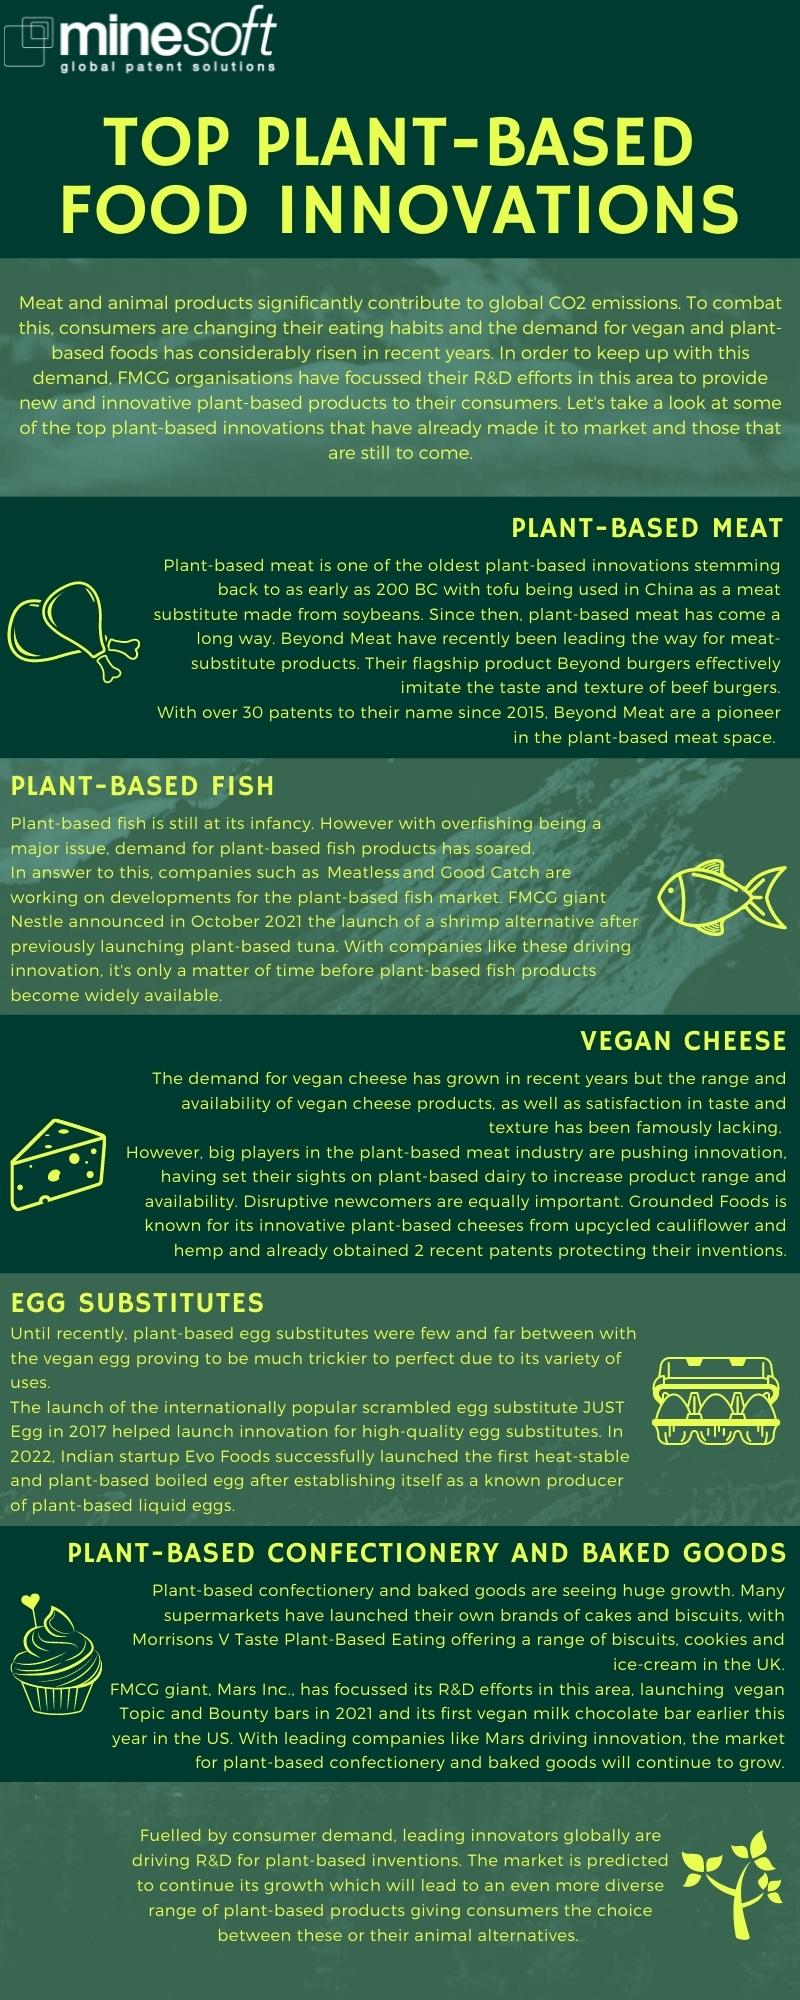 Top plant-based food innovations infographic